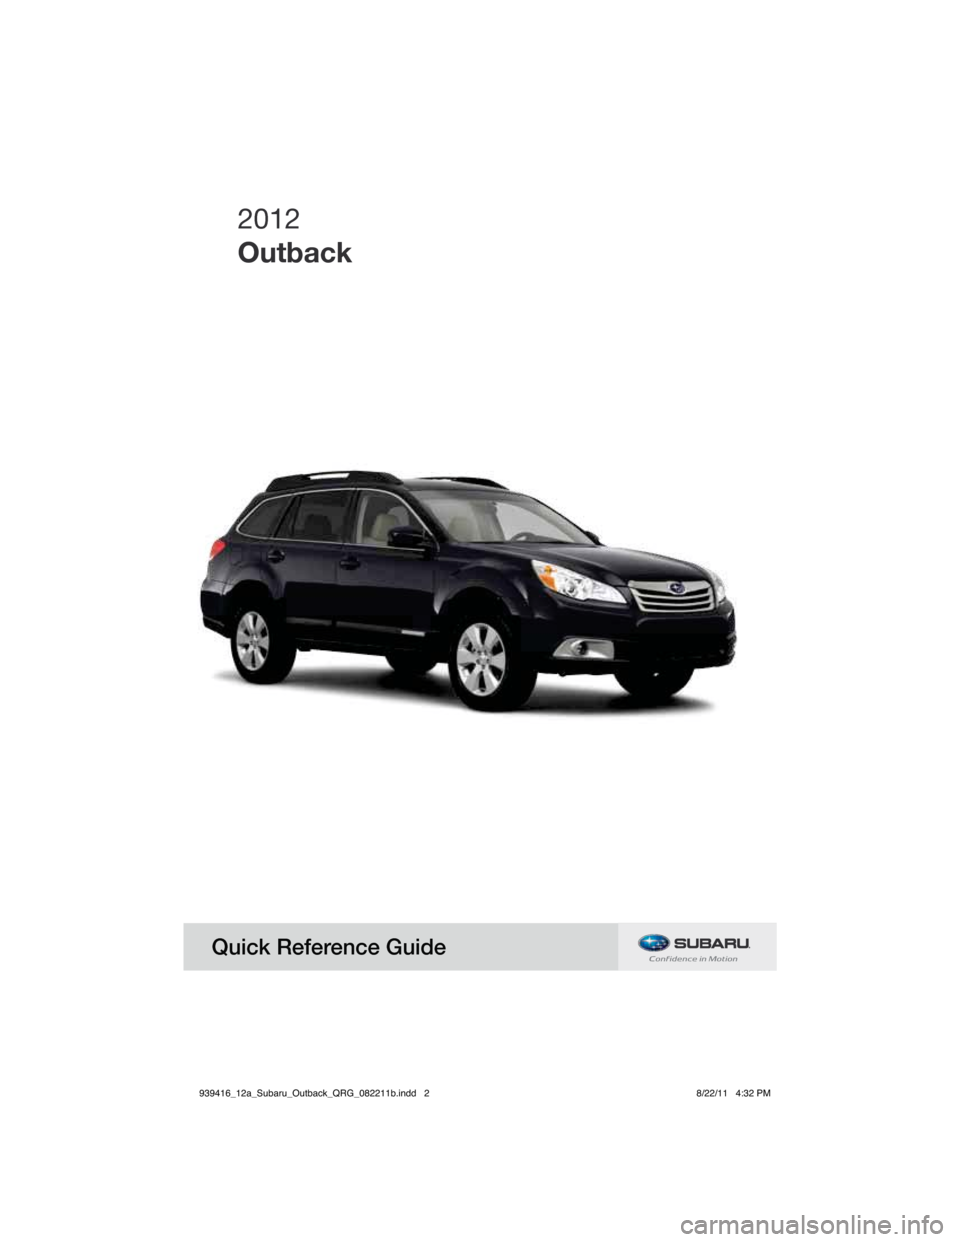 SUBARU OUTBACK 2012 5.G Quick Reference Guide 2012
Outback
Quick Reference Guide 
939416_12a_Subaru_Outback_QRG_082211b.indd   28/22/11   4:32 PM 